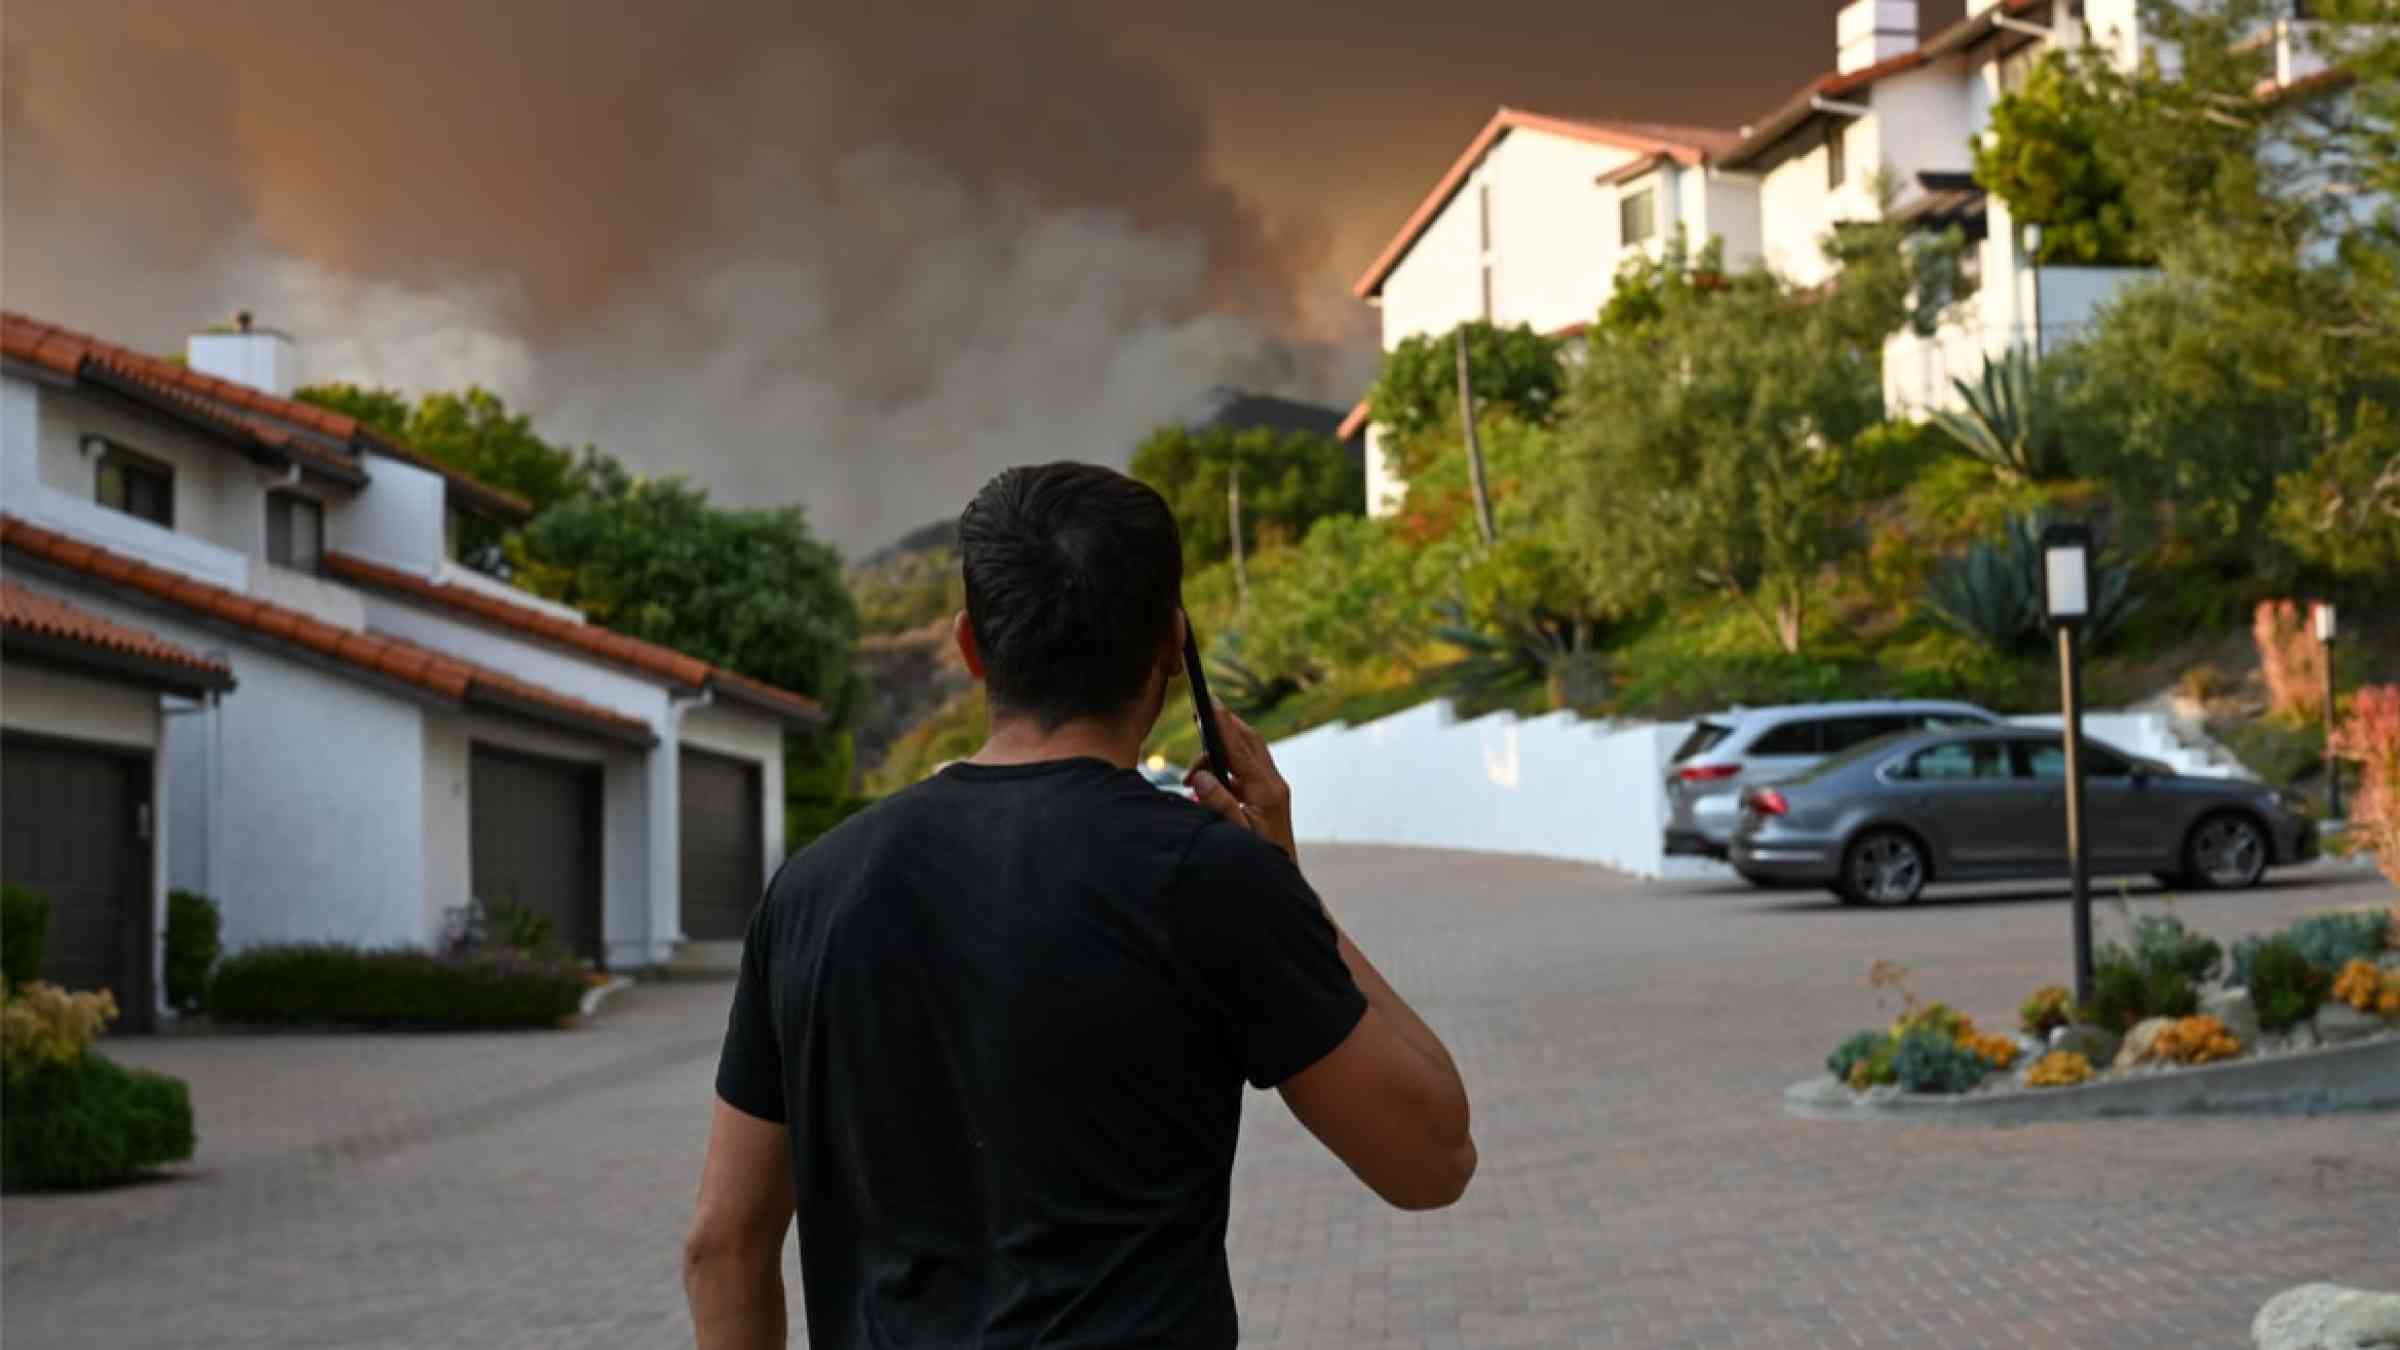 Man on the phone looking at a wildfire in a residential area in California, USA (2021).